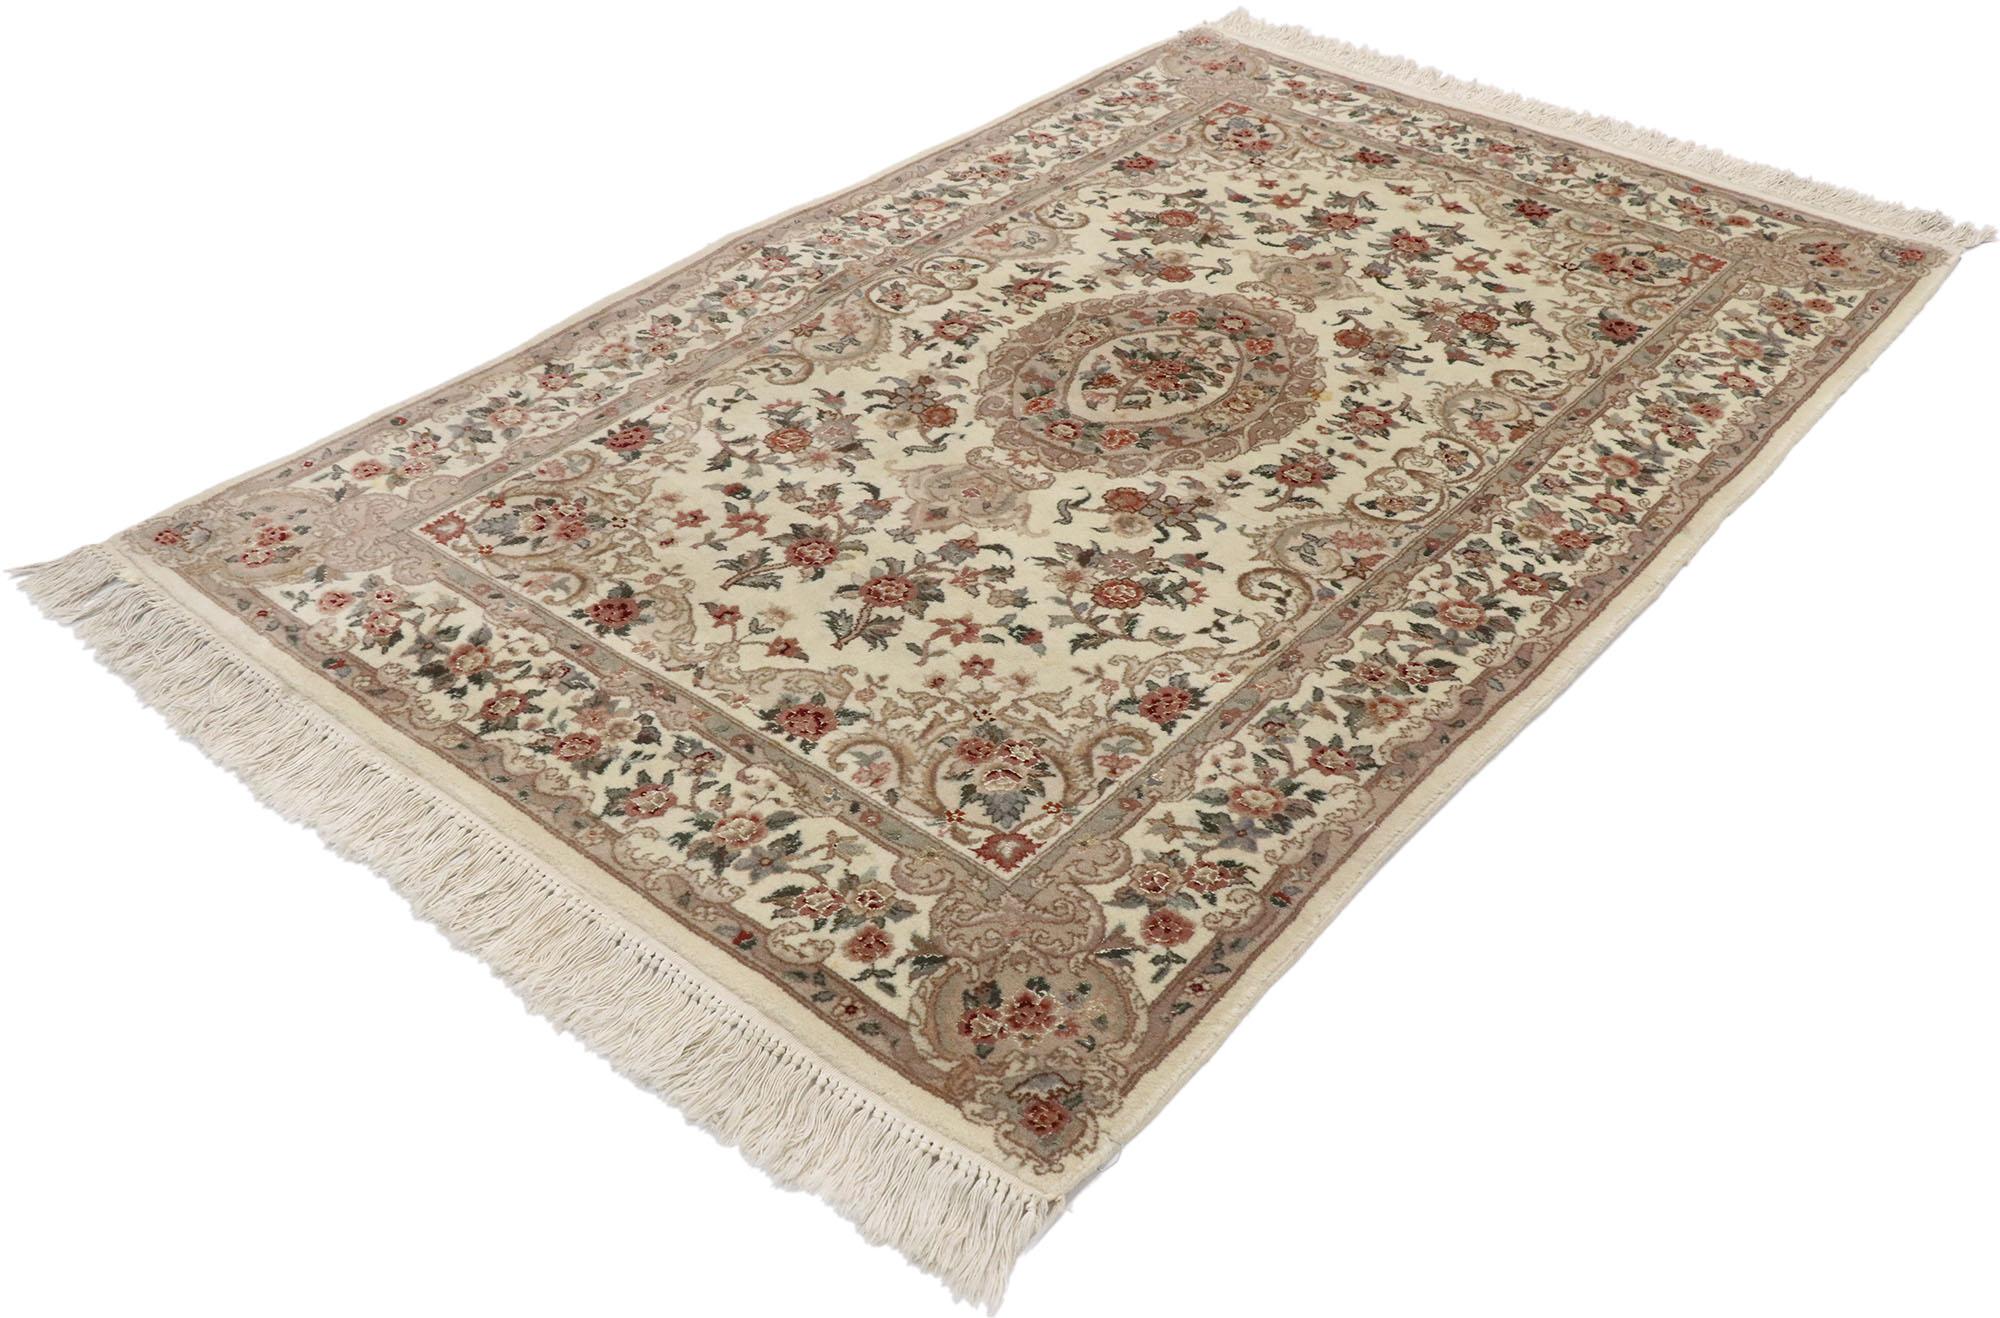 77570, vintage Persian Tabriz Chinese Floral rug with Art Nouveau Rococo style. Ornate details and effortless beauty with romantic connotations, this hand knotted wool and silk vintage Persian Tabriz Chinese rug beautifully embodies both Art Nouveau